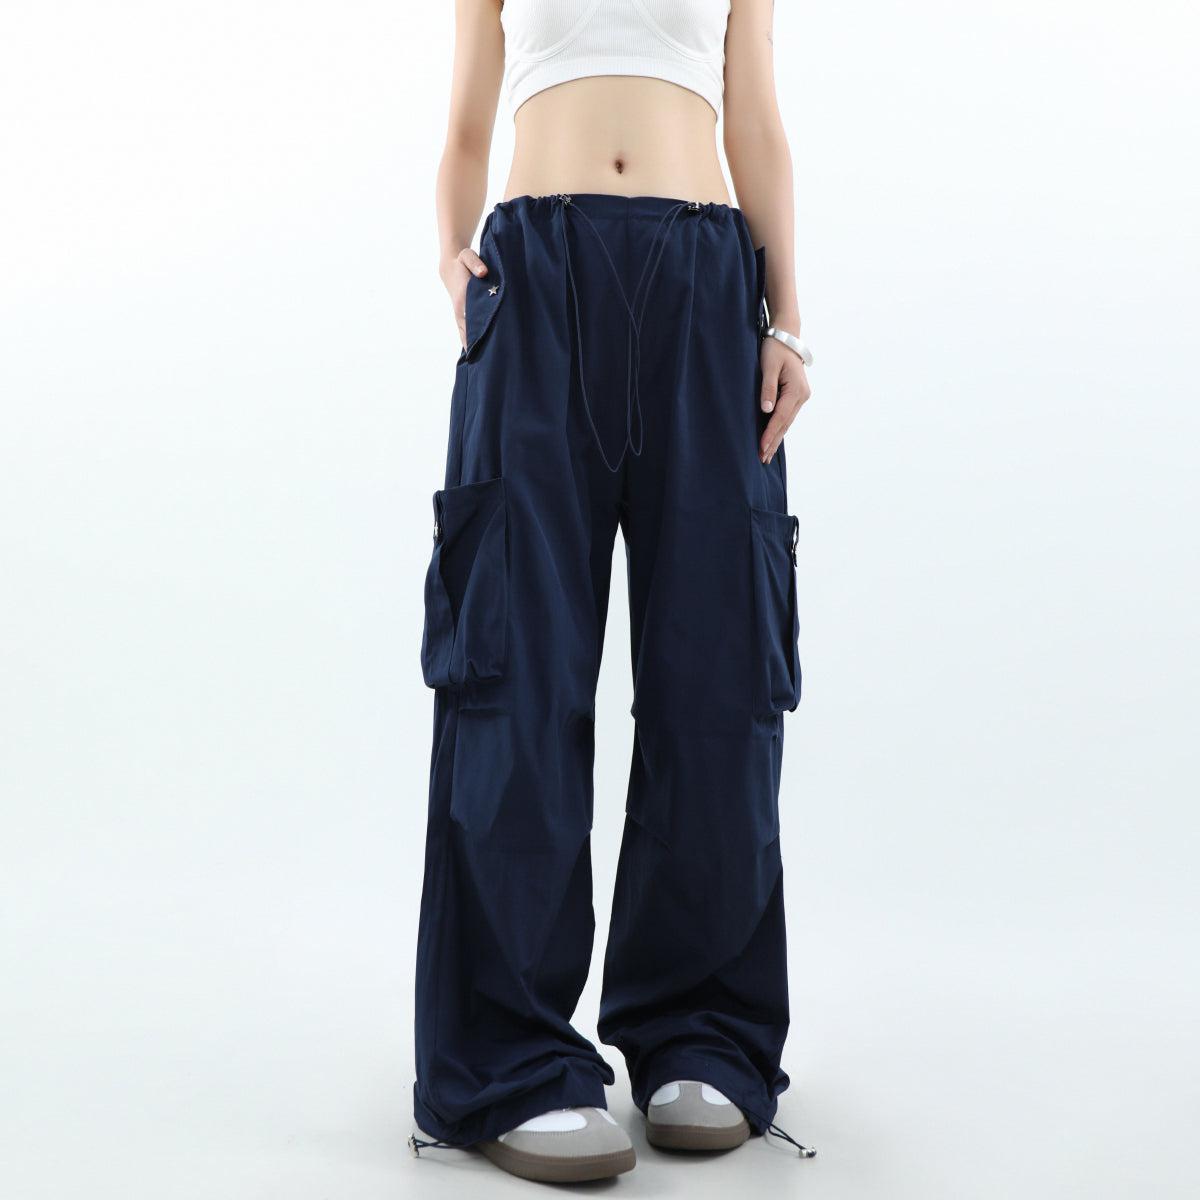 Mr Nearly Star Buttoned Loose Cargo Pants Korean Street Fashion Pants By Mr Nearly Shop Online at OH Vault